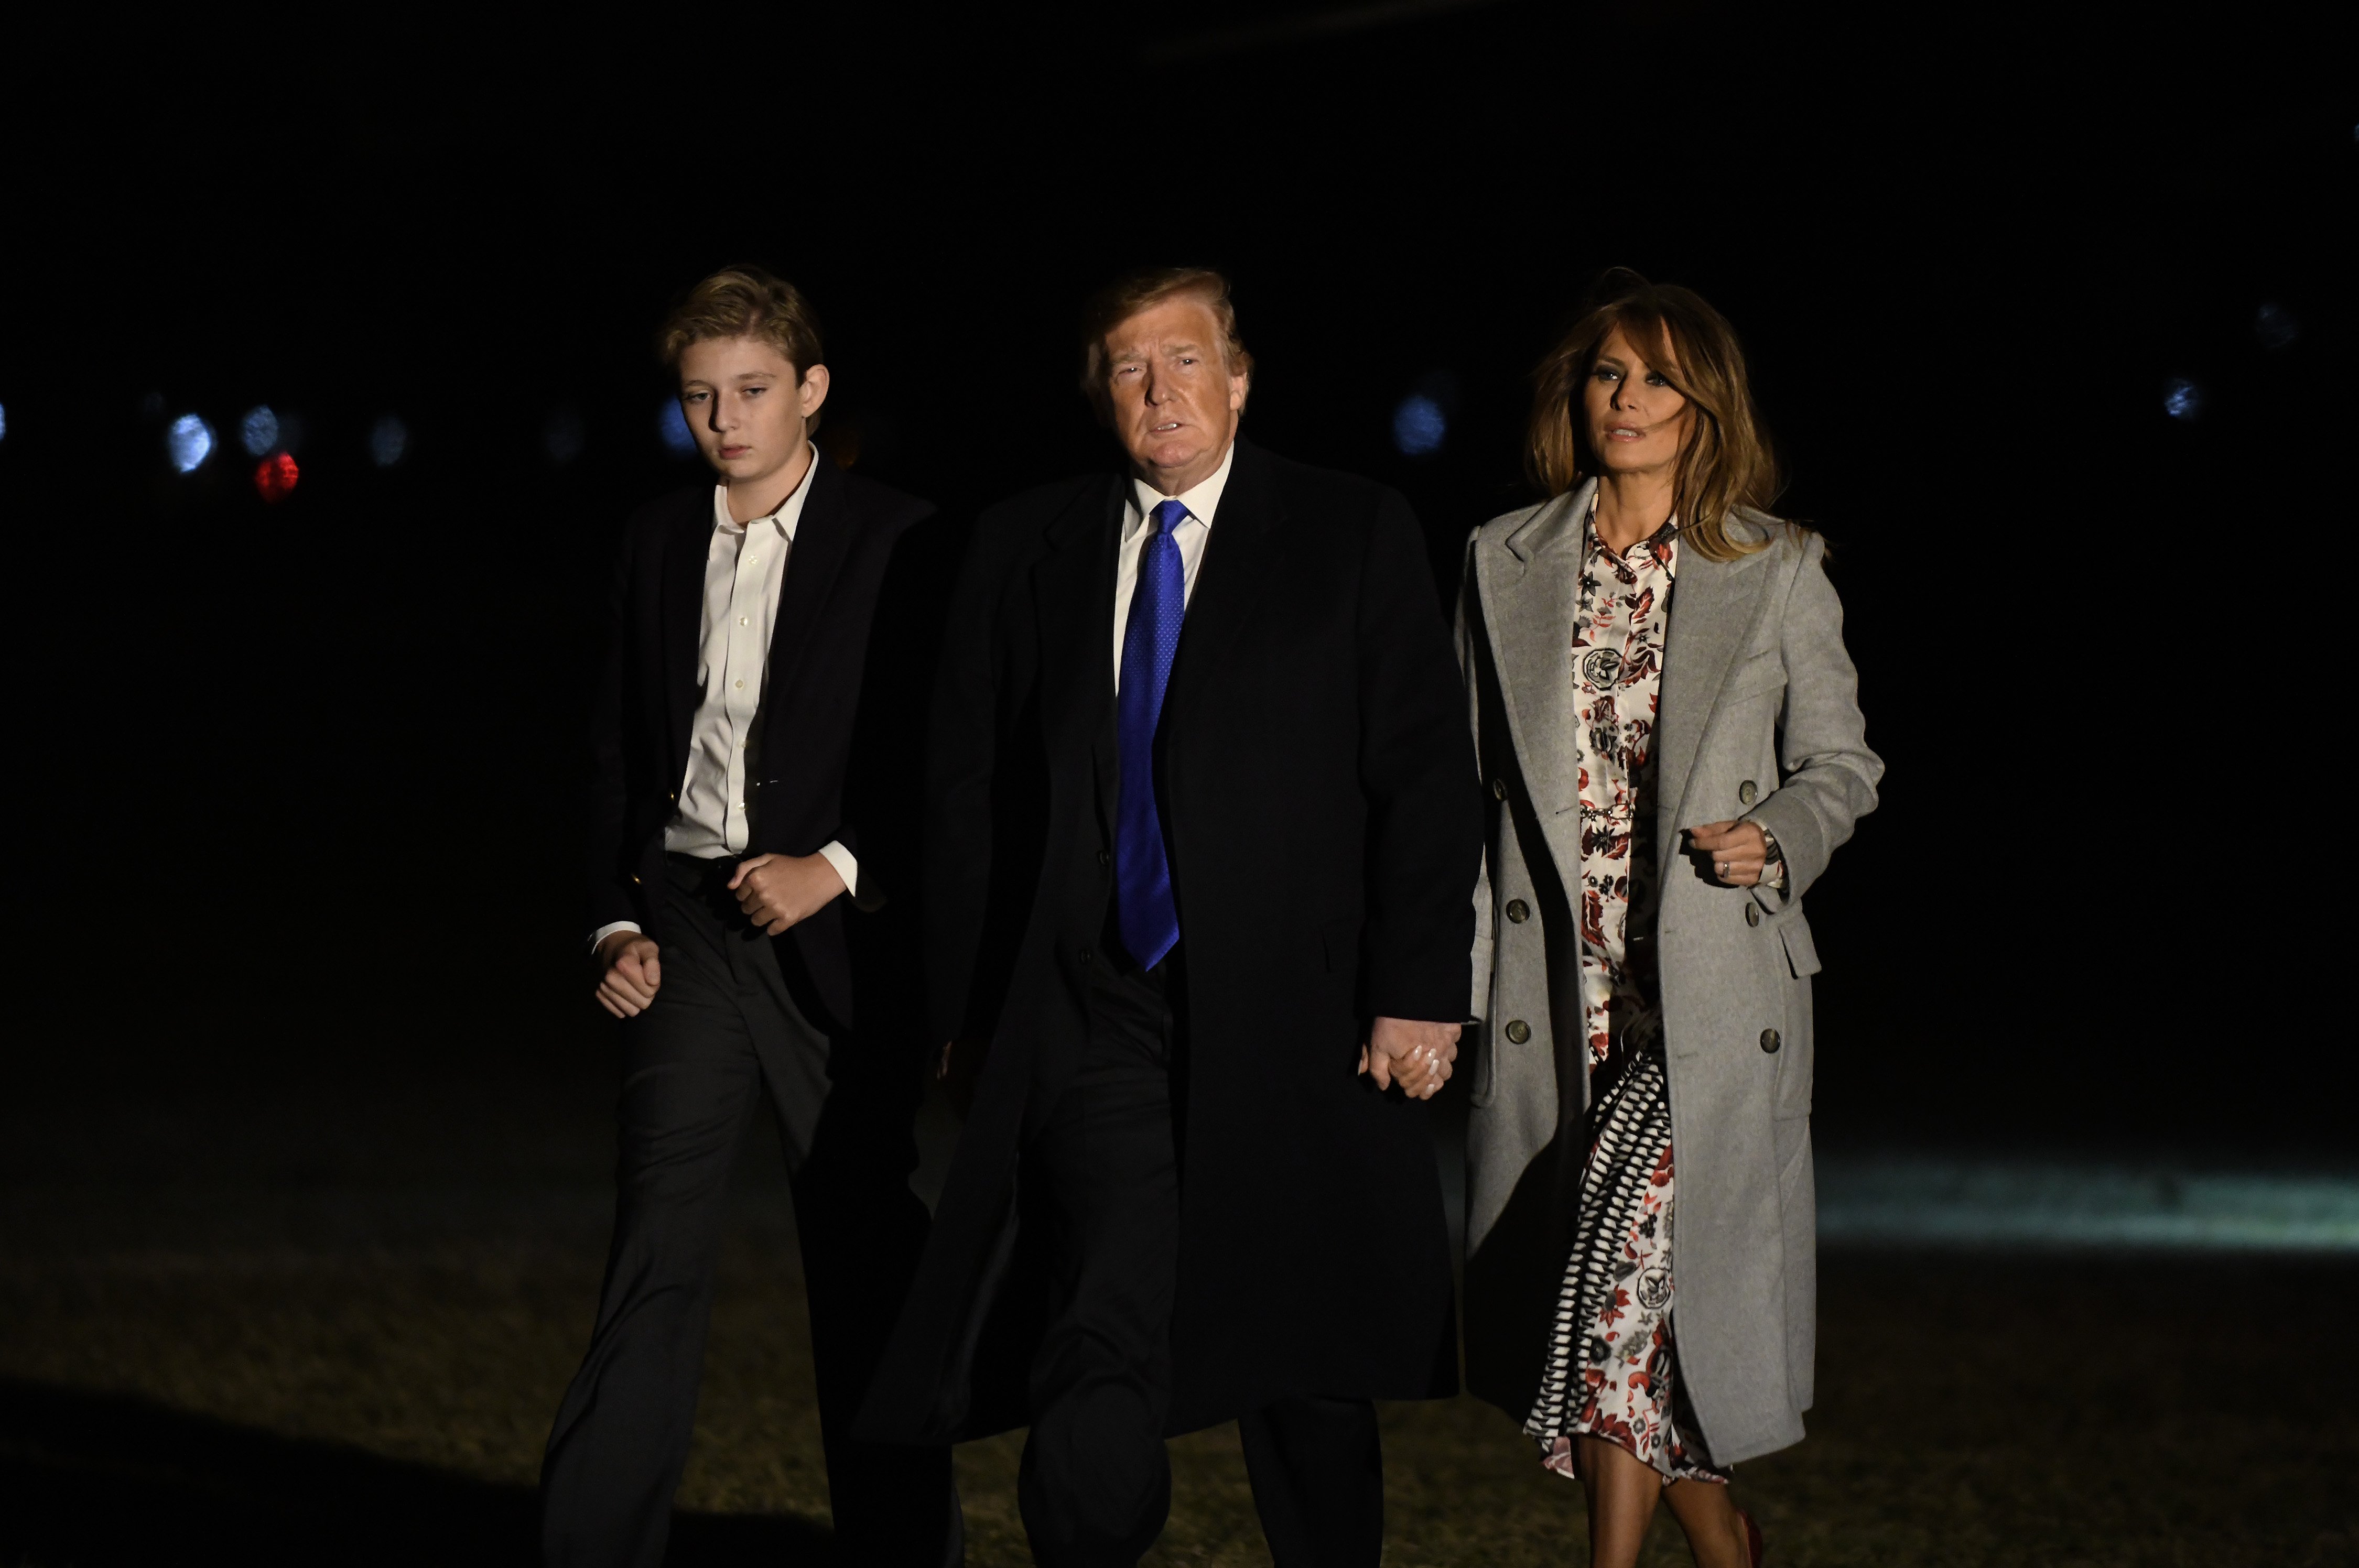 President Donald Trump and First Lady Melania with their son Baron on the grounds of the White House | Photo: Getty Images